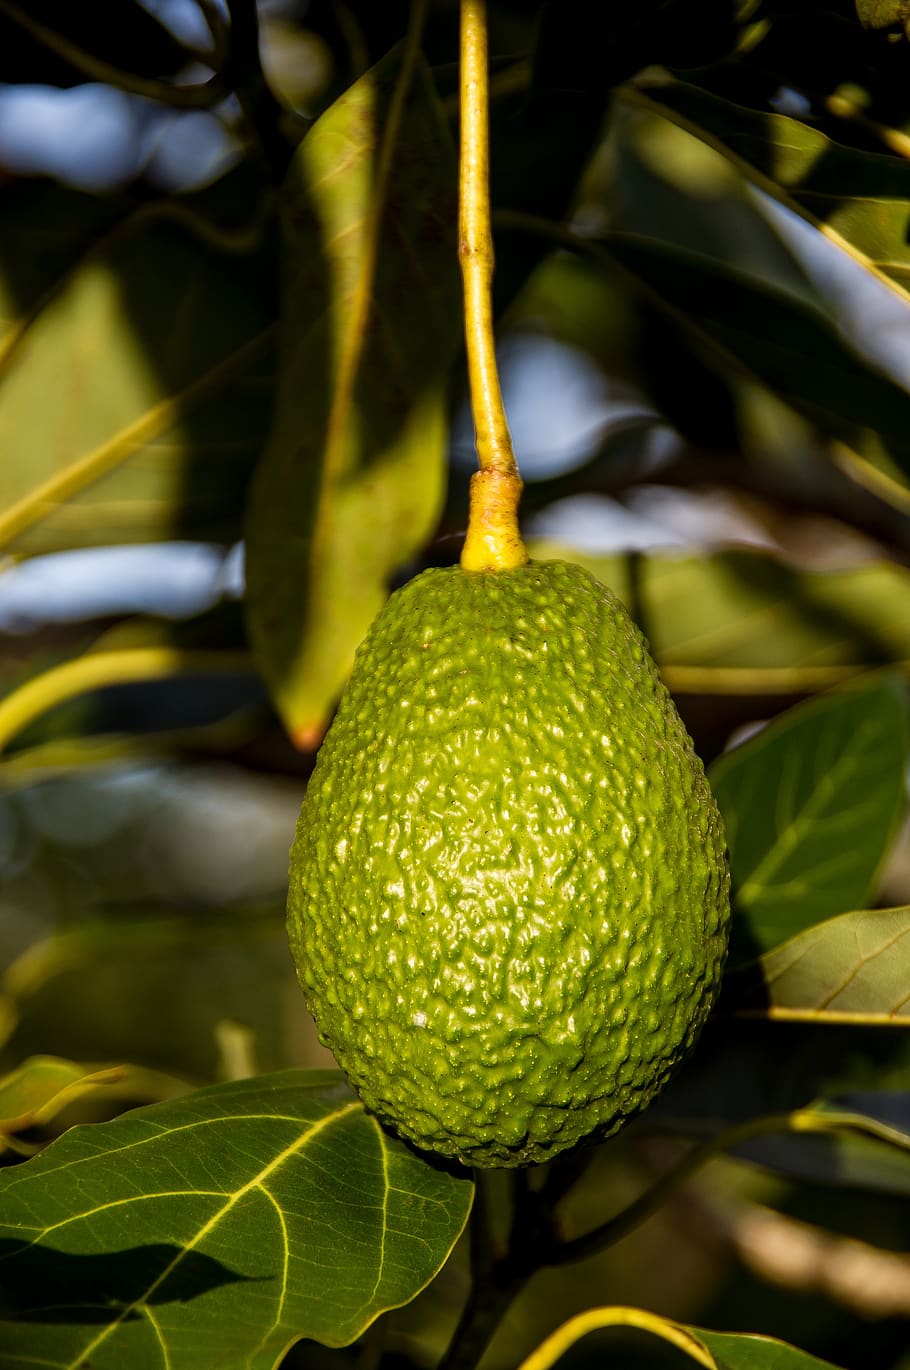 hass avocado, fruit, tree, green, growing, close-up, leaf, plant part